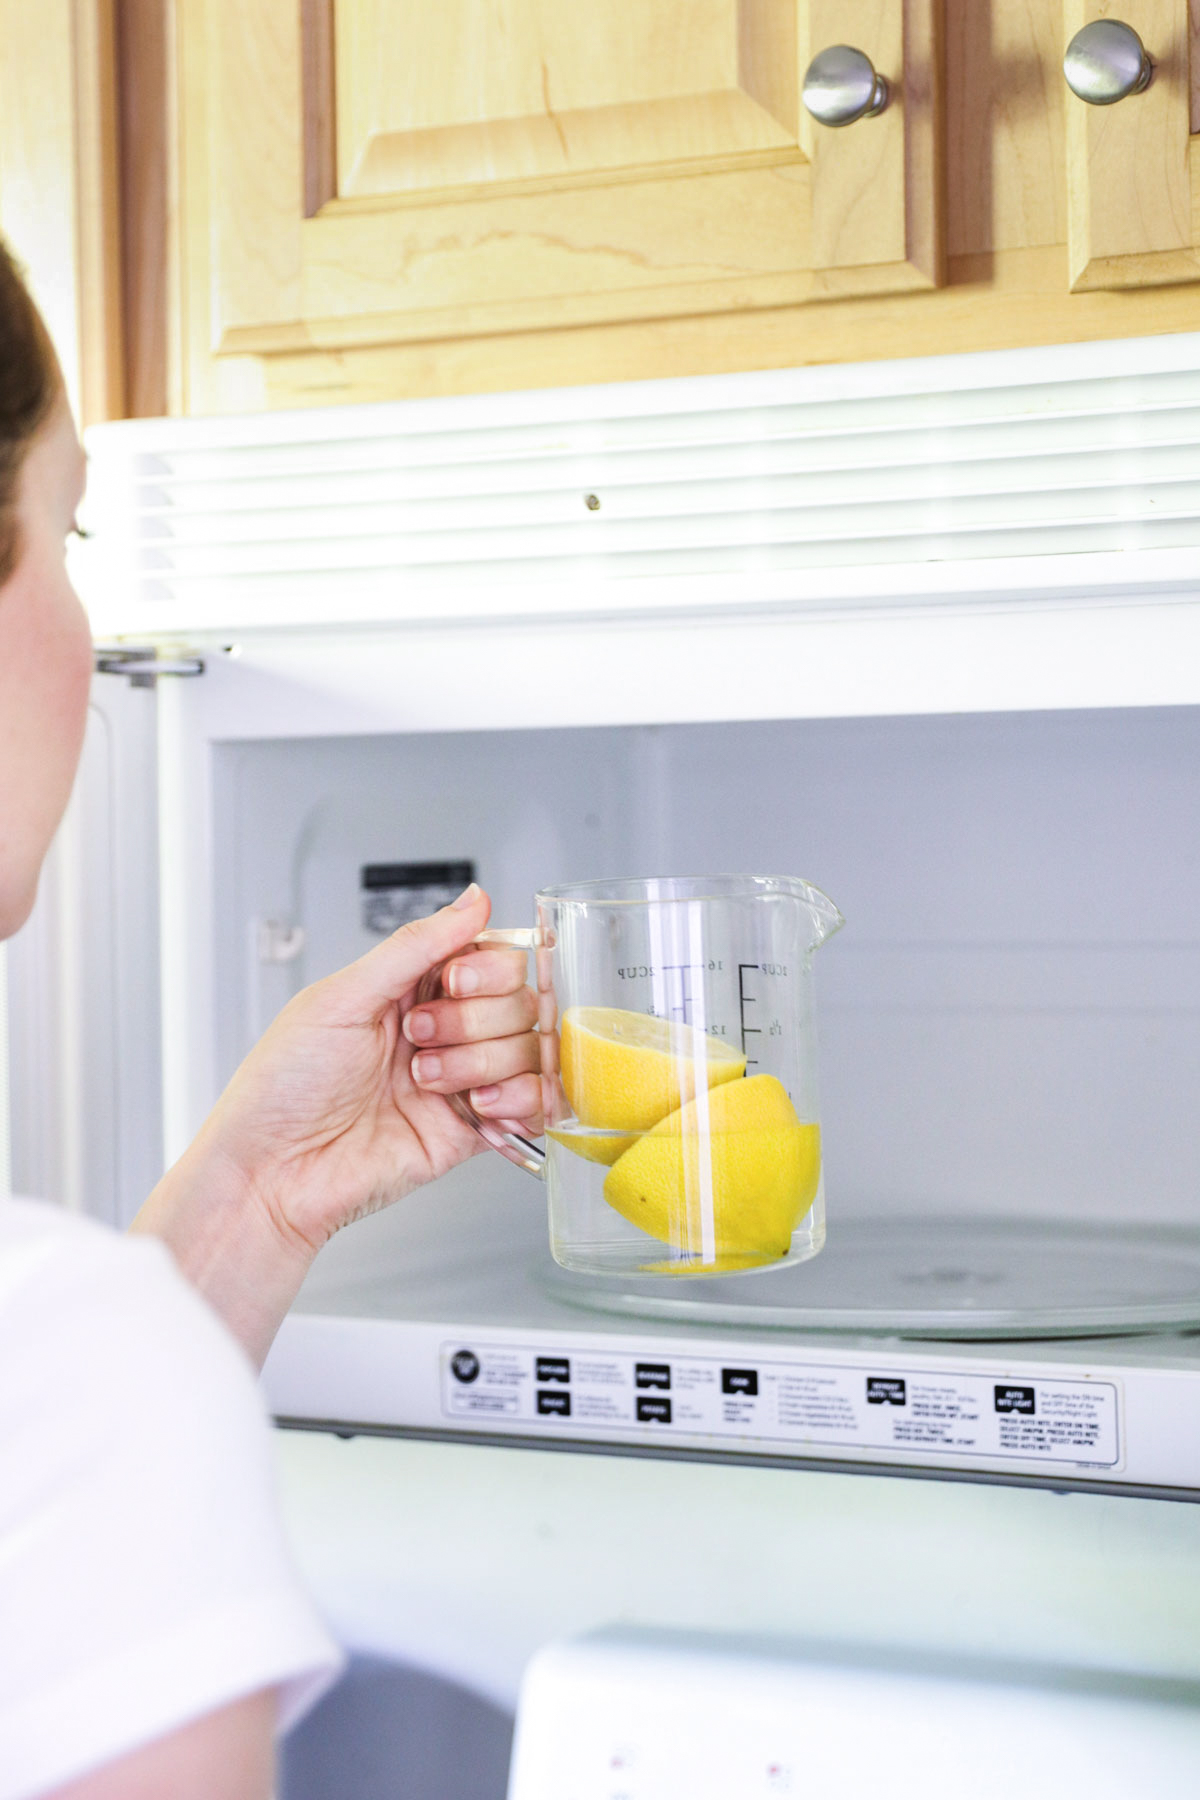 How to clean a microwave with lemon